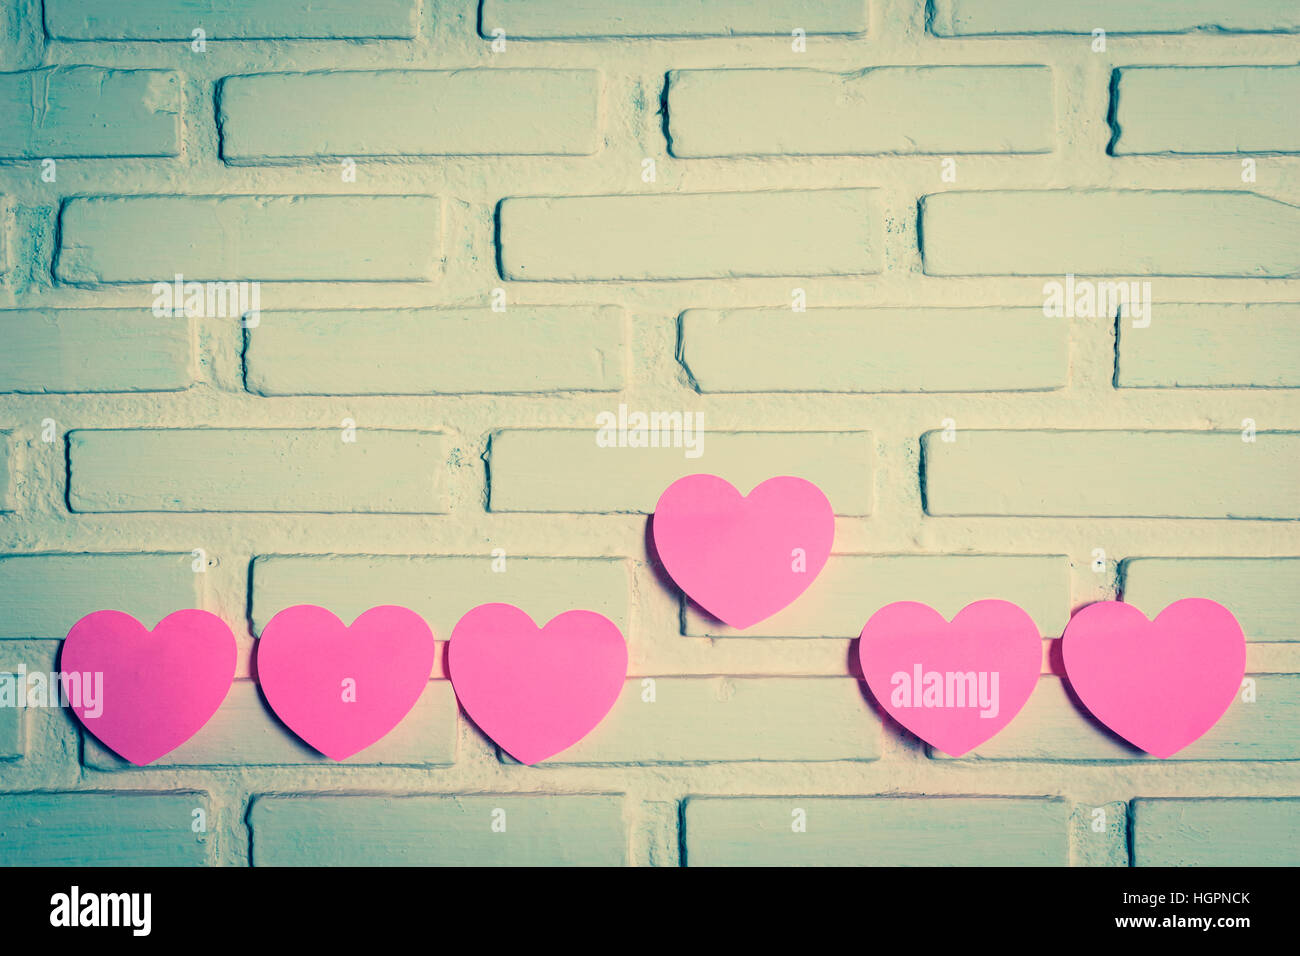 Pink sticky notes hearts shaped lined holes on the wall and a heart the outstanding one. vintage style Stock Photo